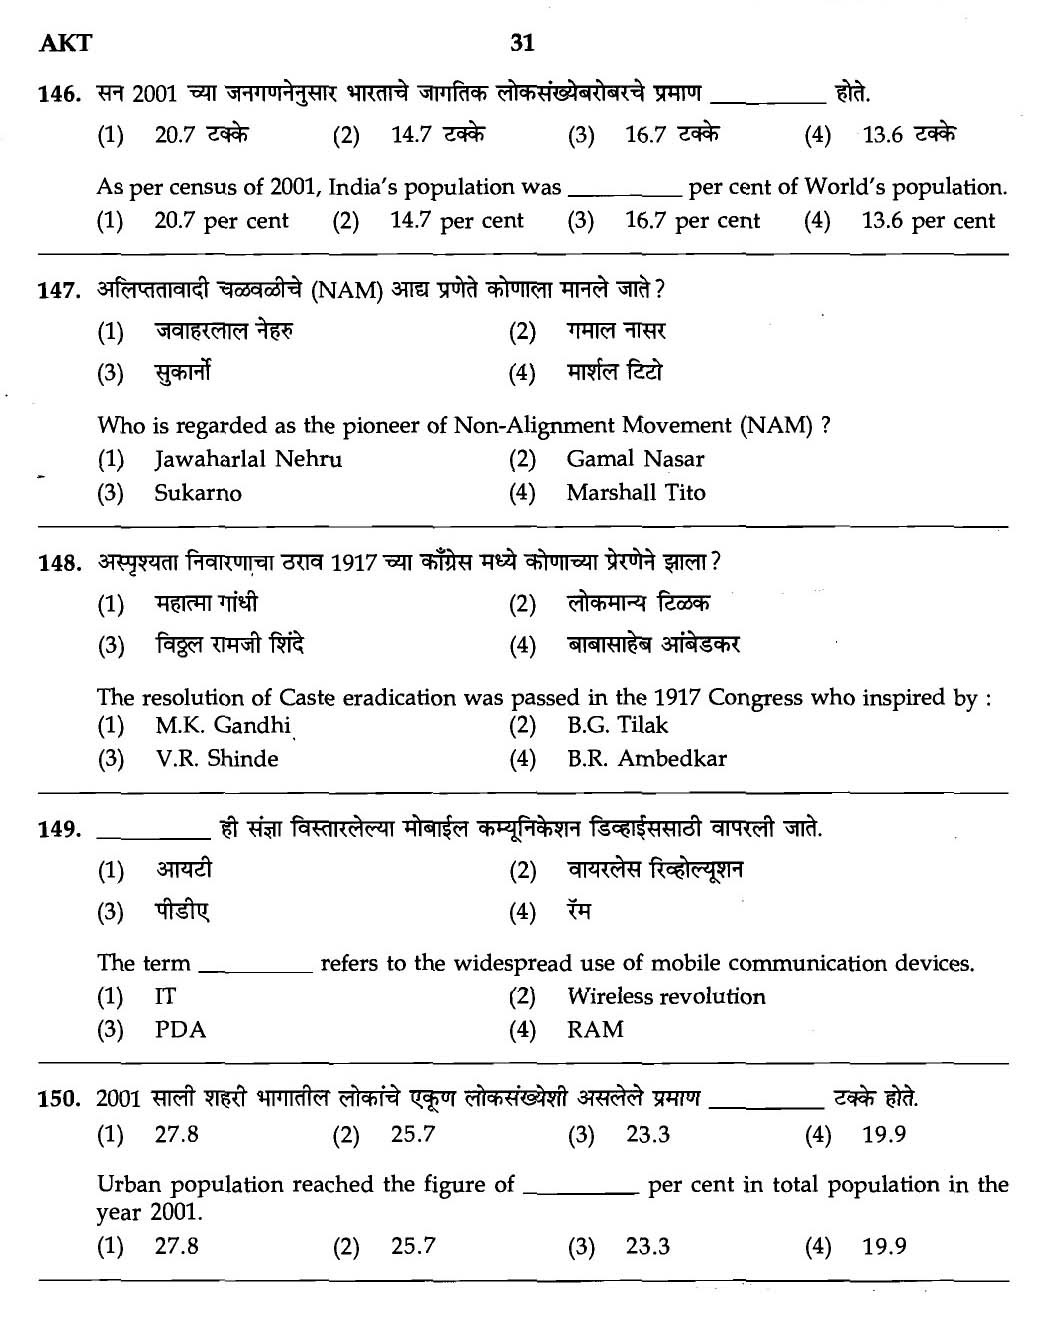 MPSC Agricultural Services Exam 2007 General Question Paper 29